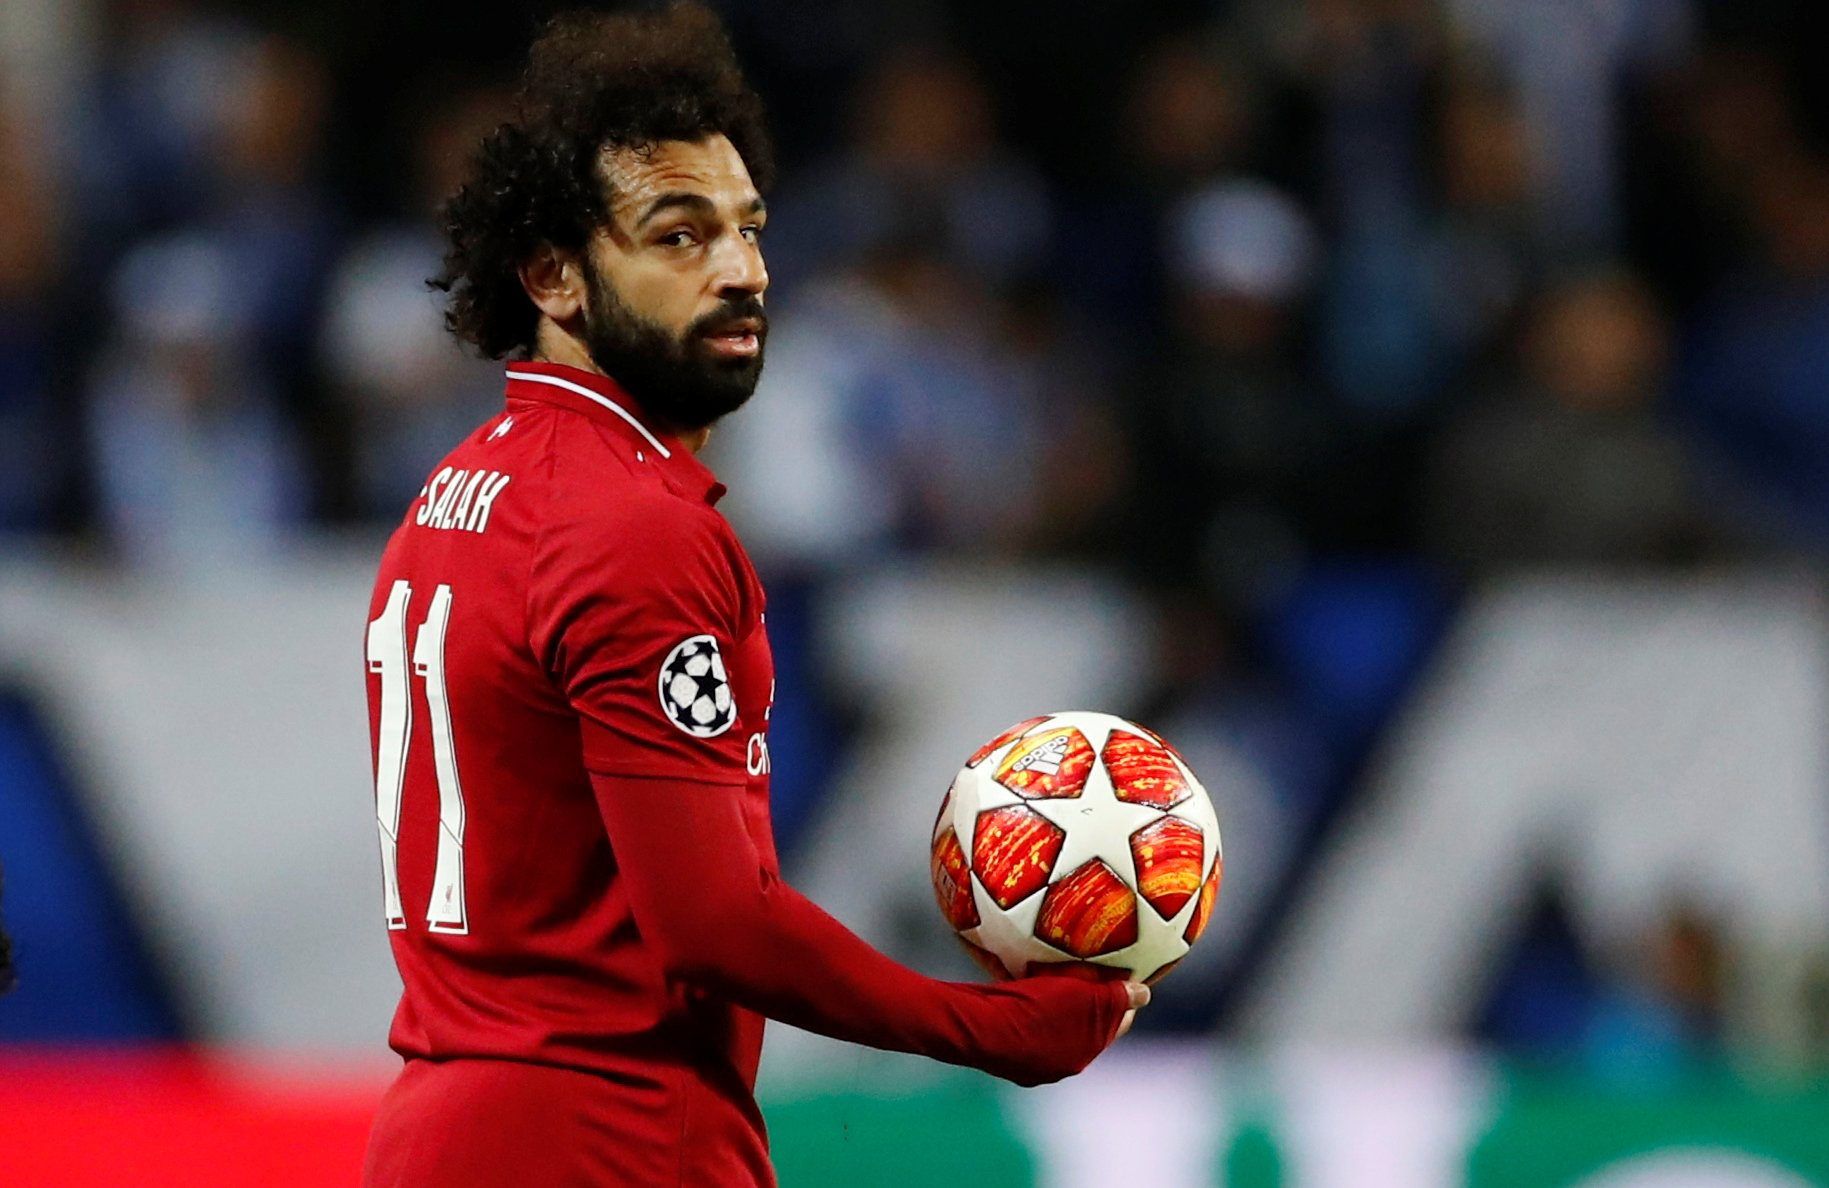 Soccer Football - Champions League Quarter Final Second Leg - FC Porto v Liverpool - Estadio do Dragao, Porto, Portugal - April 17, 2019  Liverpool's Mohamed Salah with the match ball              Action Images via Reuters/Andrew Boyers